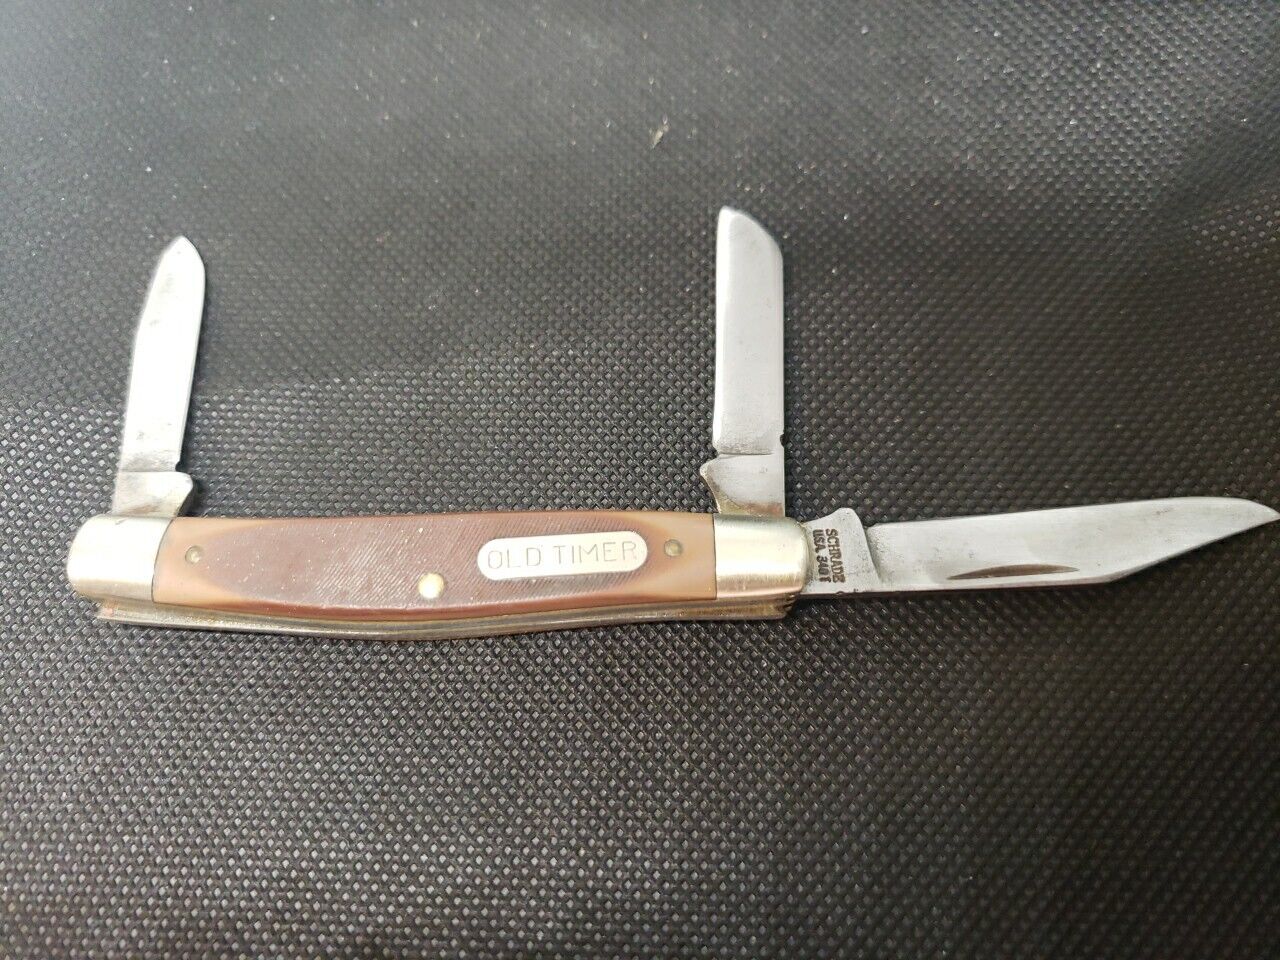 Schrade Old Timer Knife Made In USA 34OT Medium Stockman Saw Cut Delrin Handles